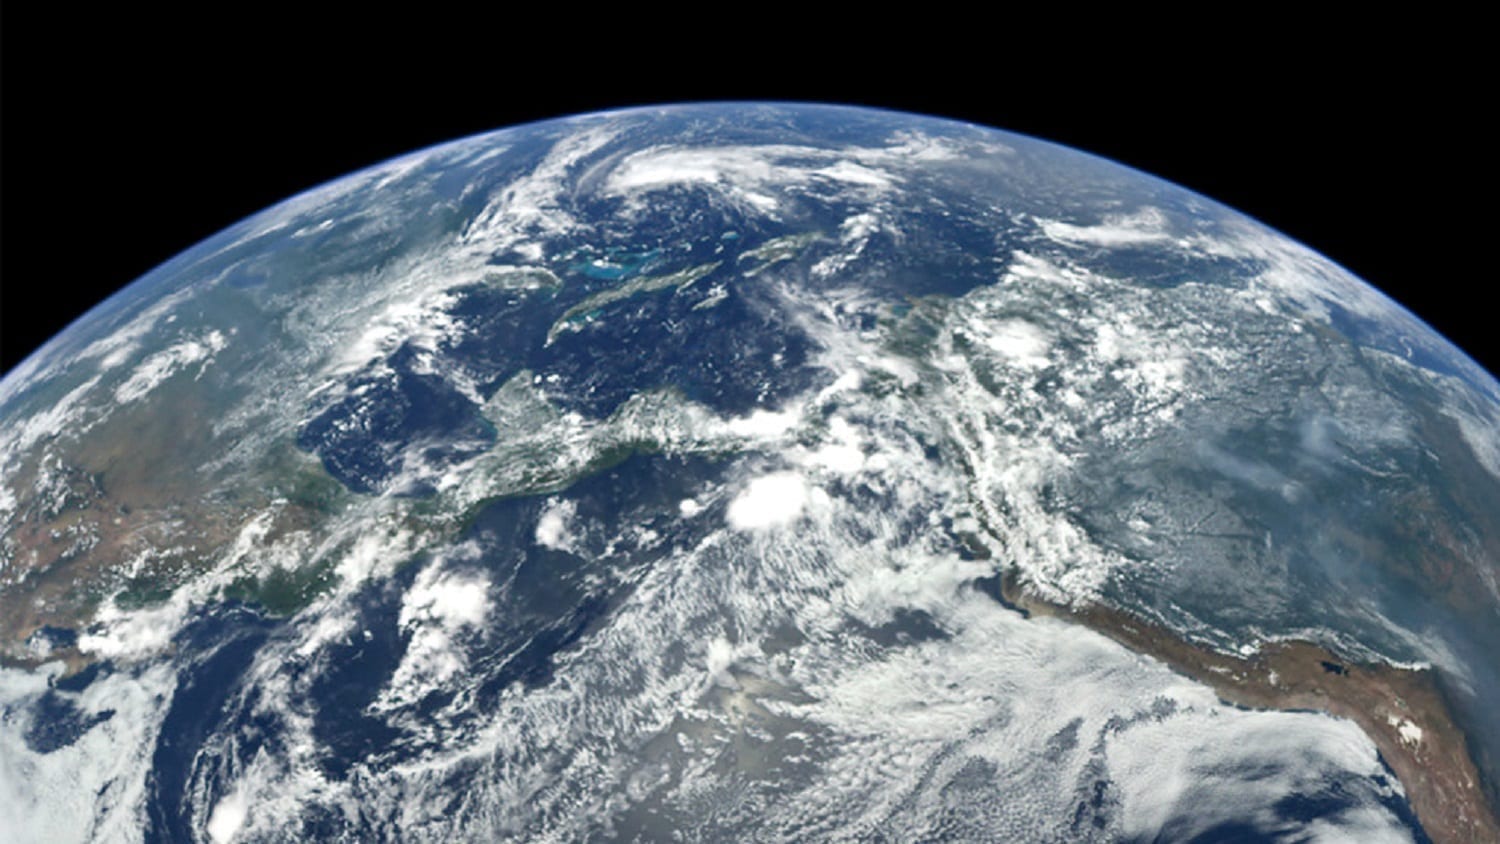 Central America as seen from the Messenger spacecraft, NASA